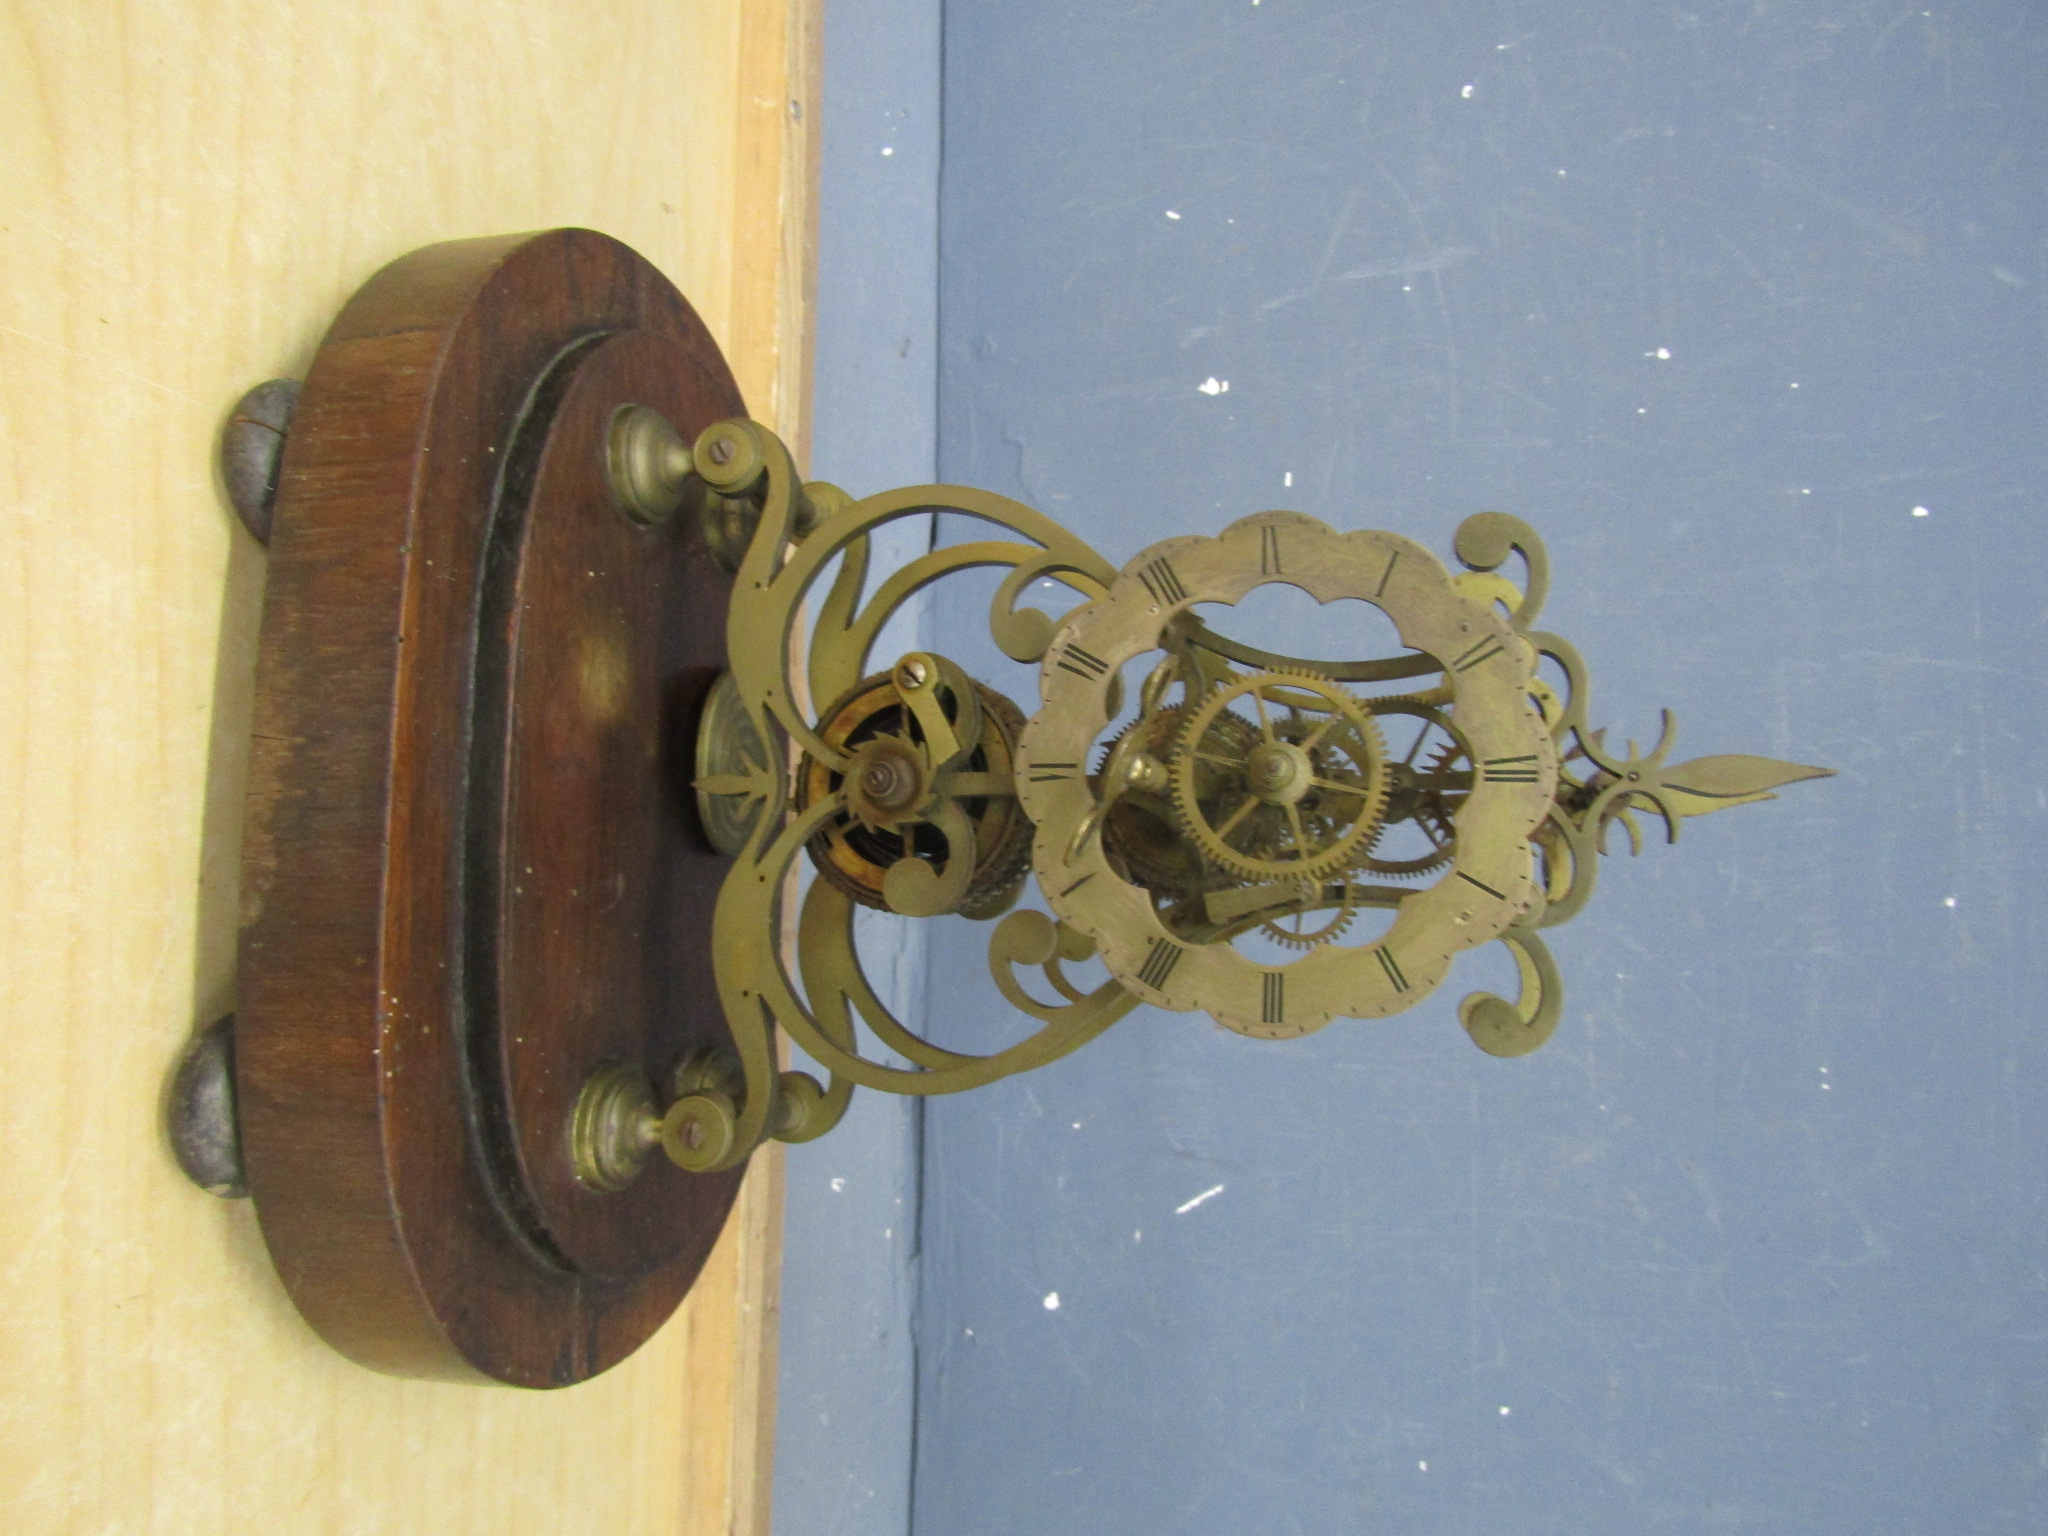 Brass fusee skeleton clock (missing glass dome and hands)